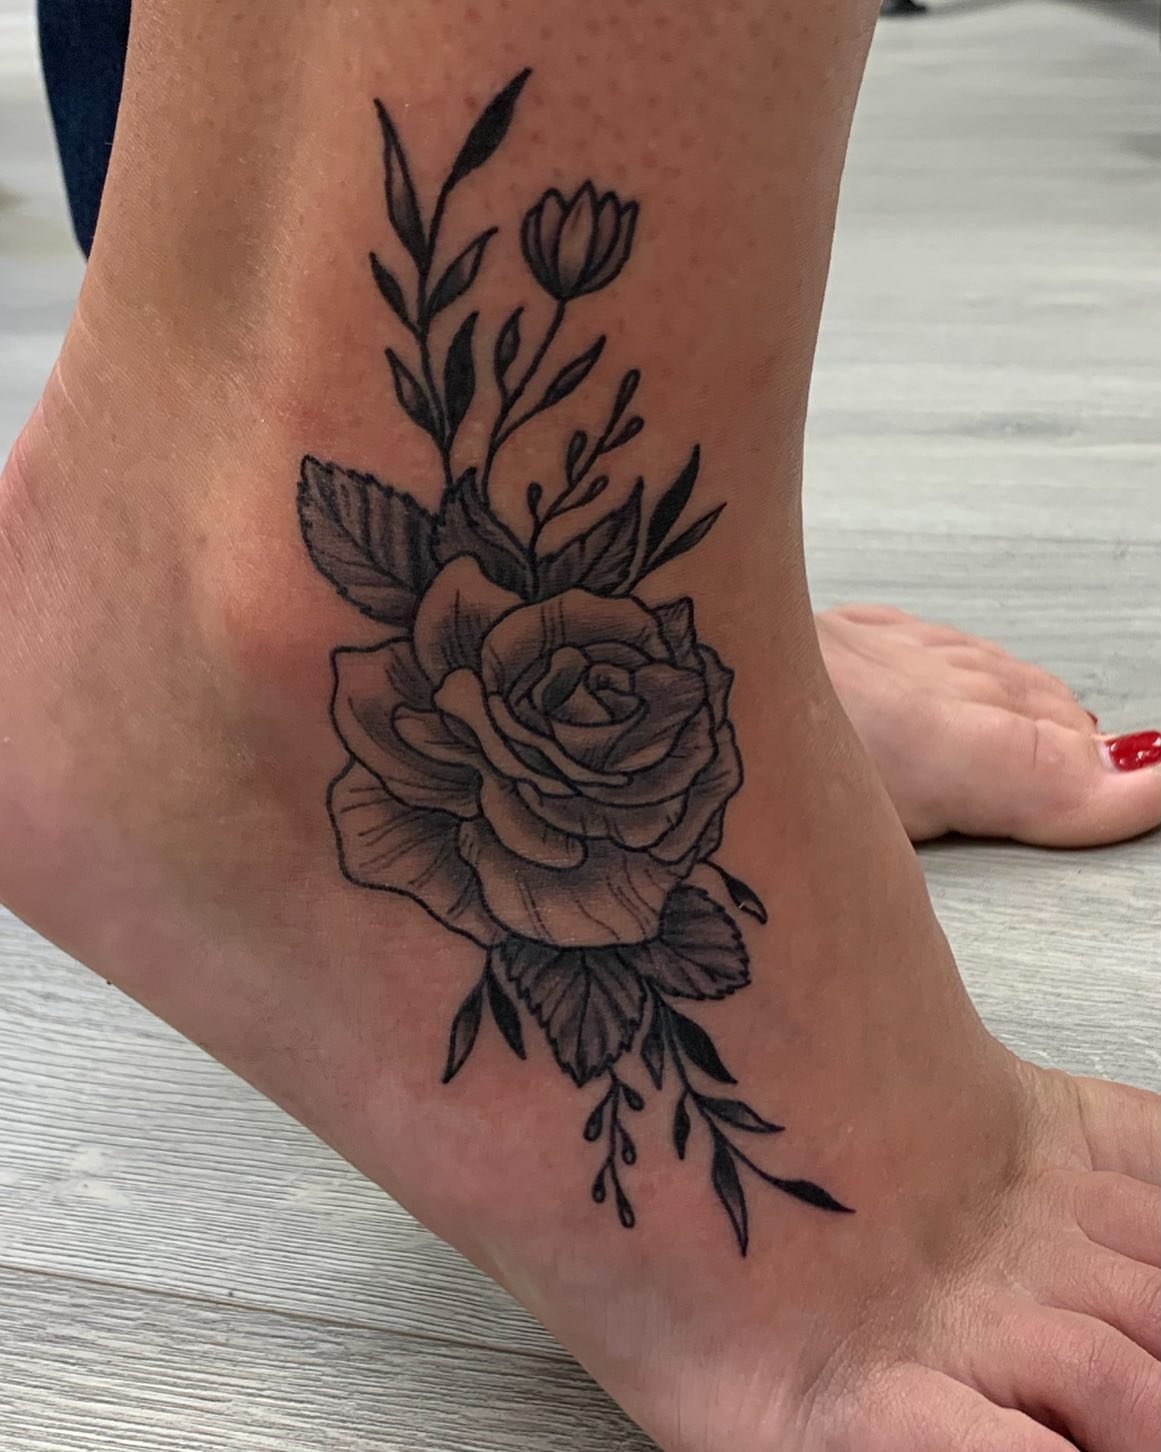 Tattoo by Bruce

Bruce has some room for Walk-ins this week, and spots still open for May. Message or stop in to Temple Tattoo for scheduling or availability. 

Temple Tattoo Since 1996